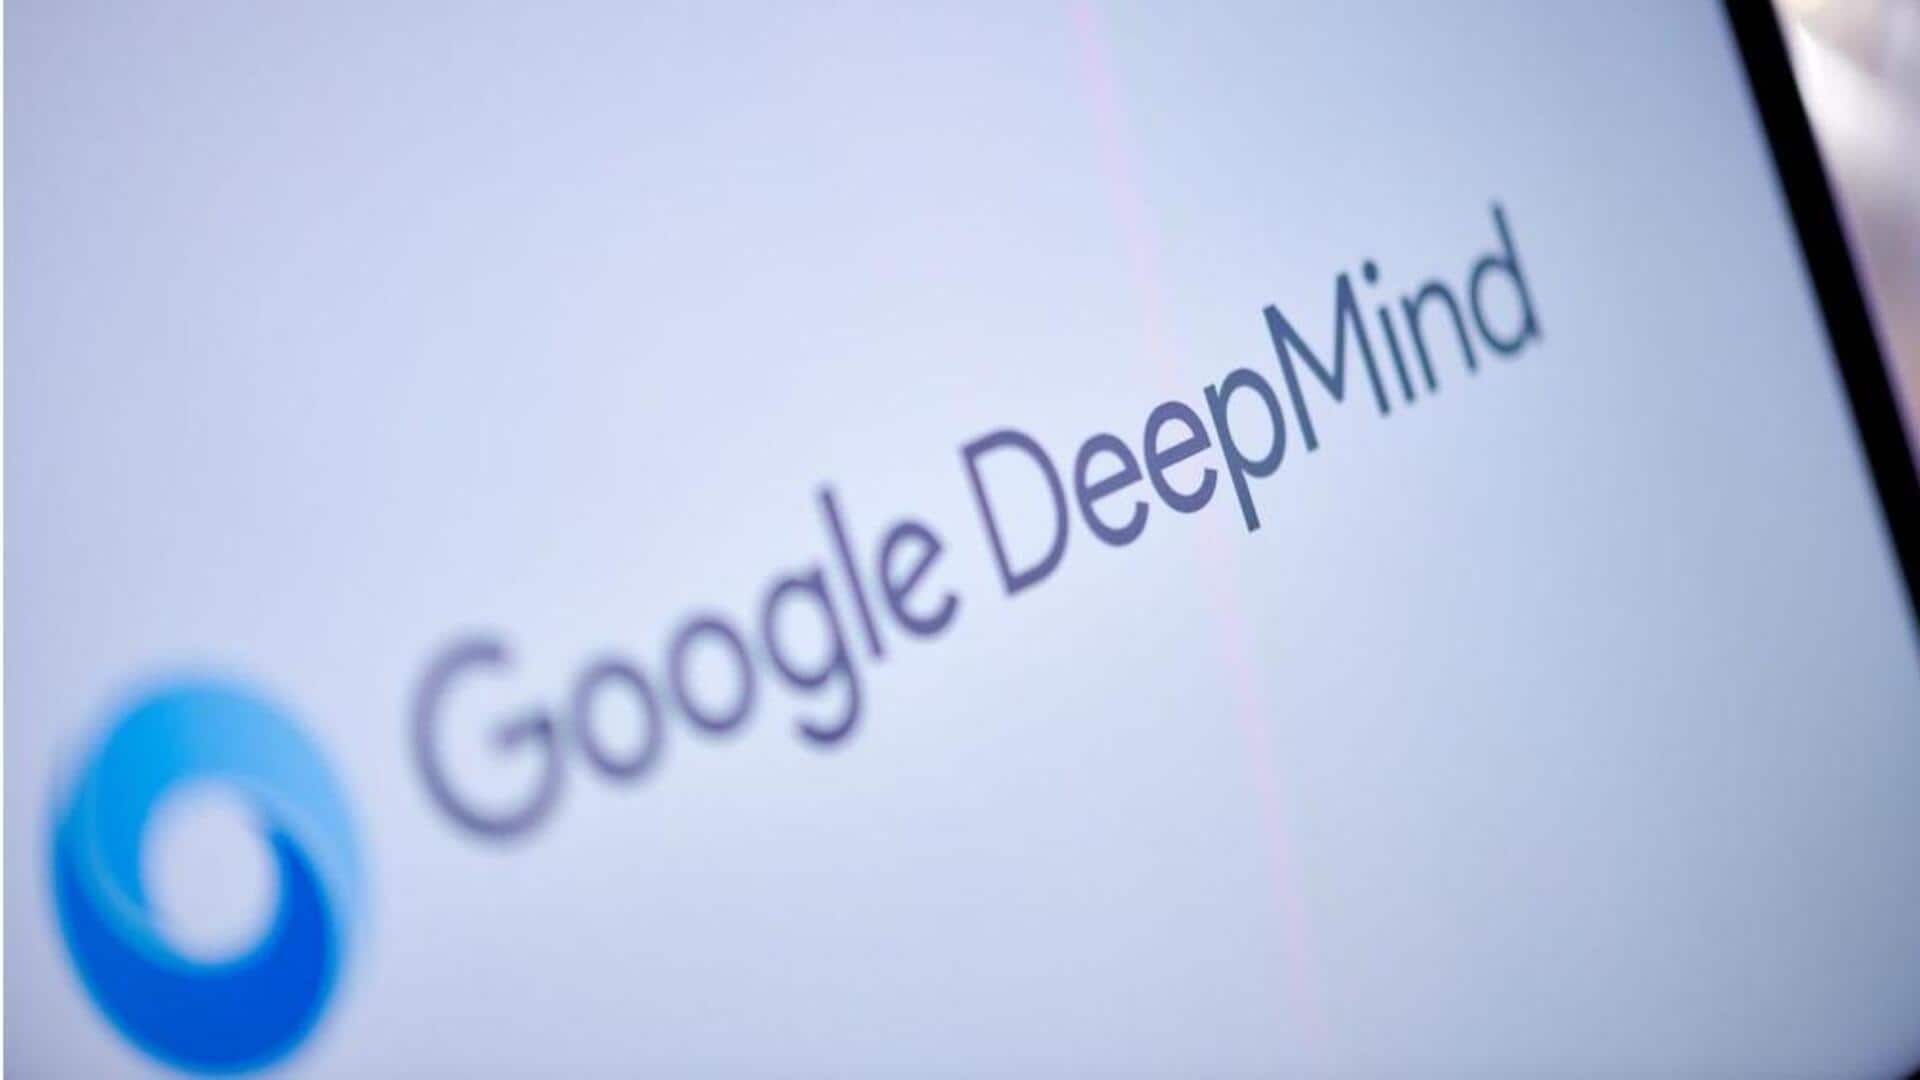 Google's DeepMind scientists are considering founding their own AI start-up